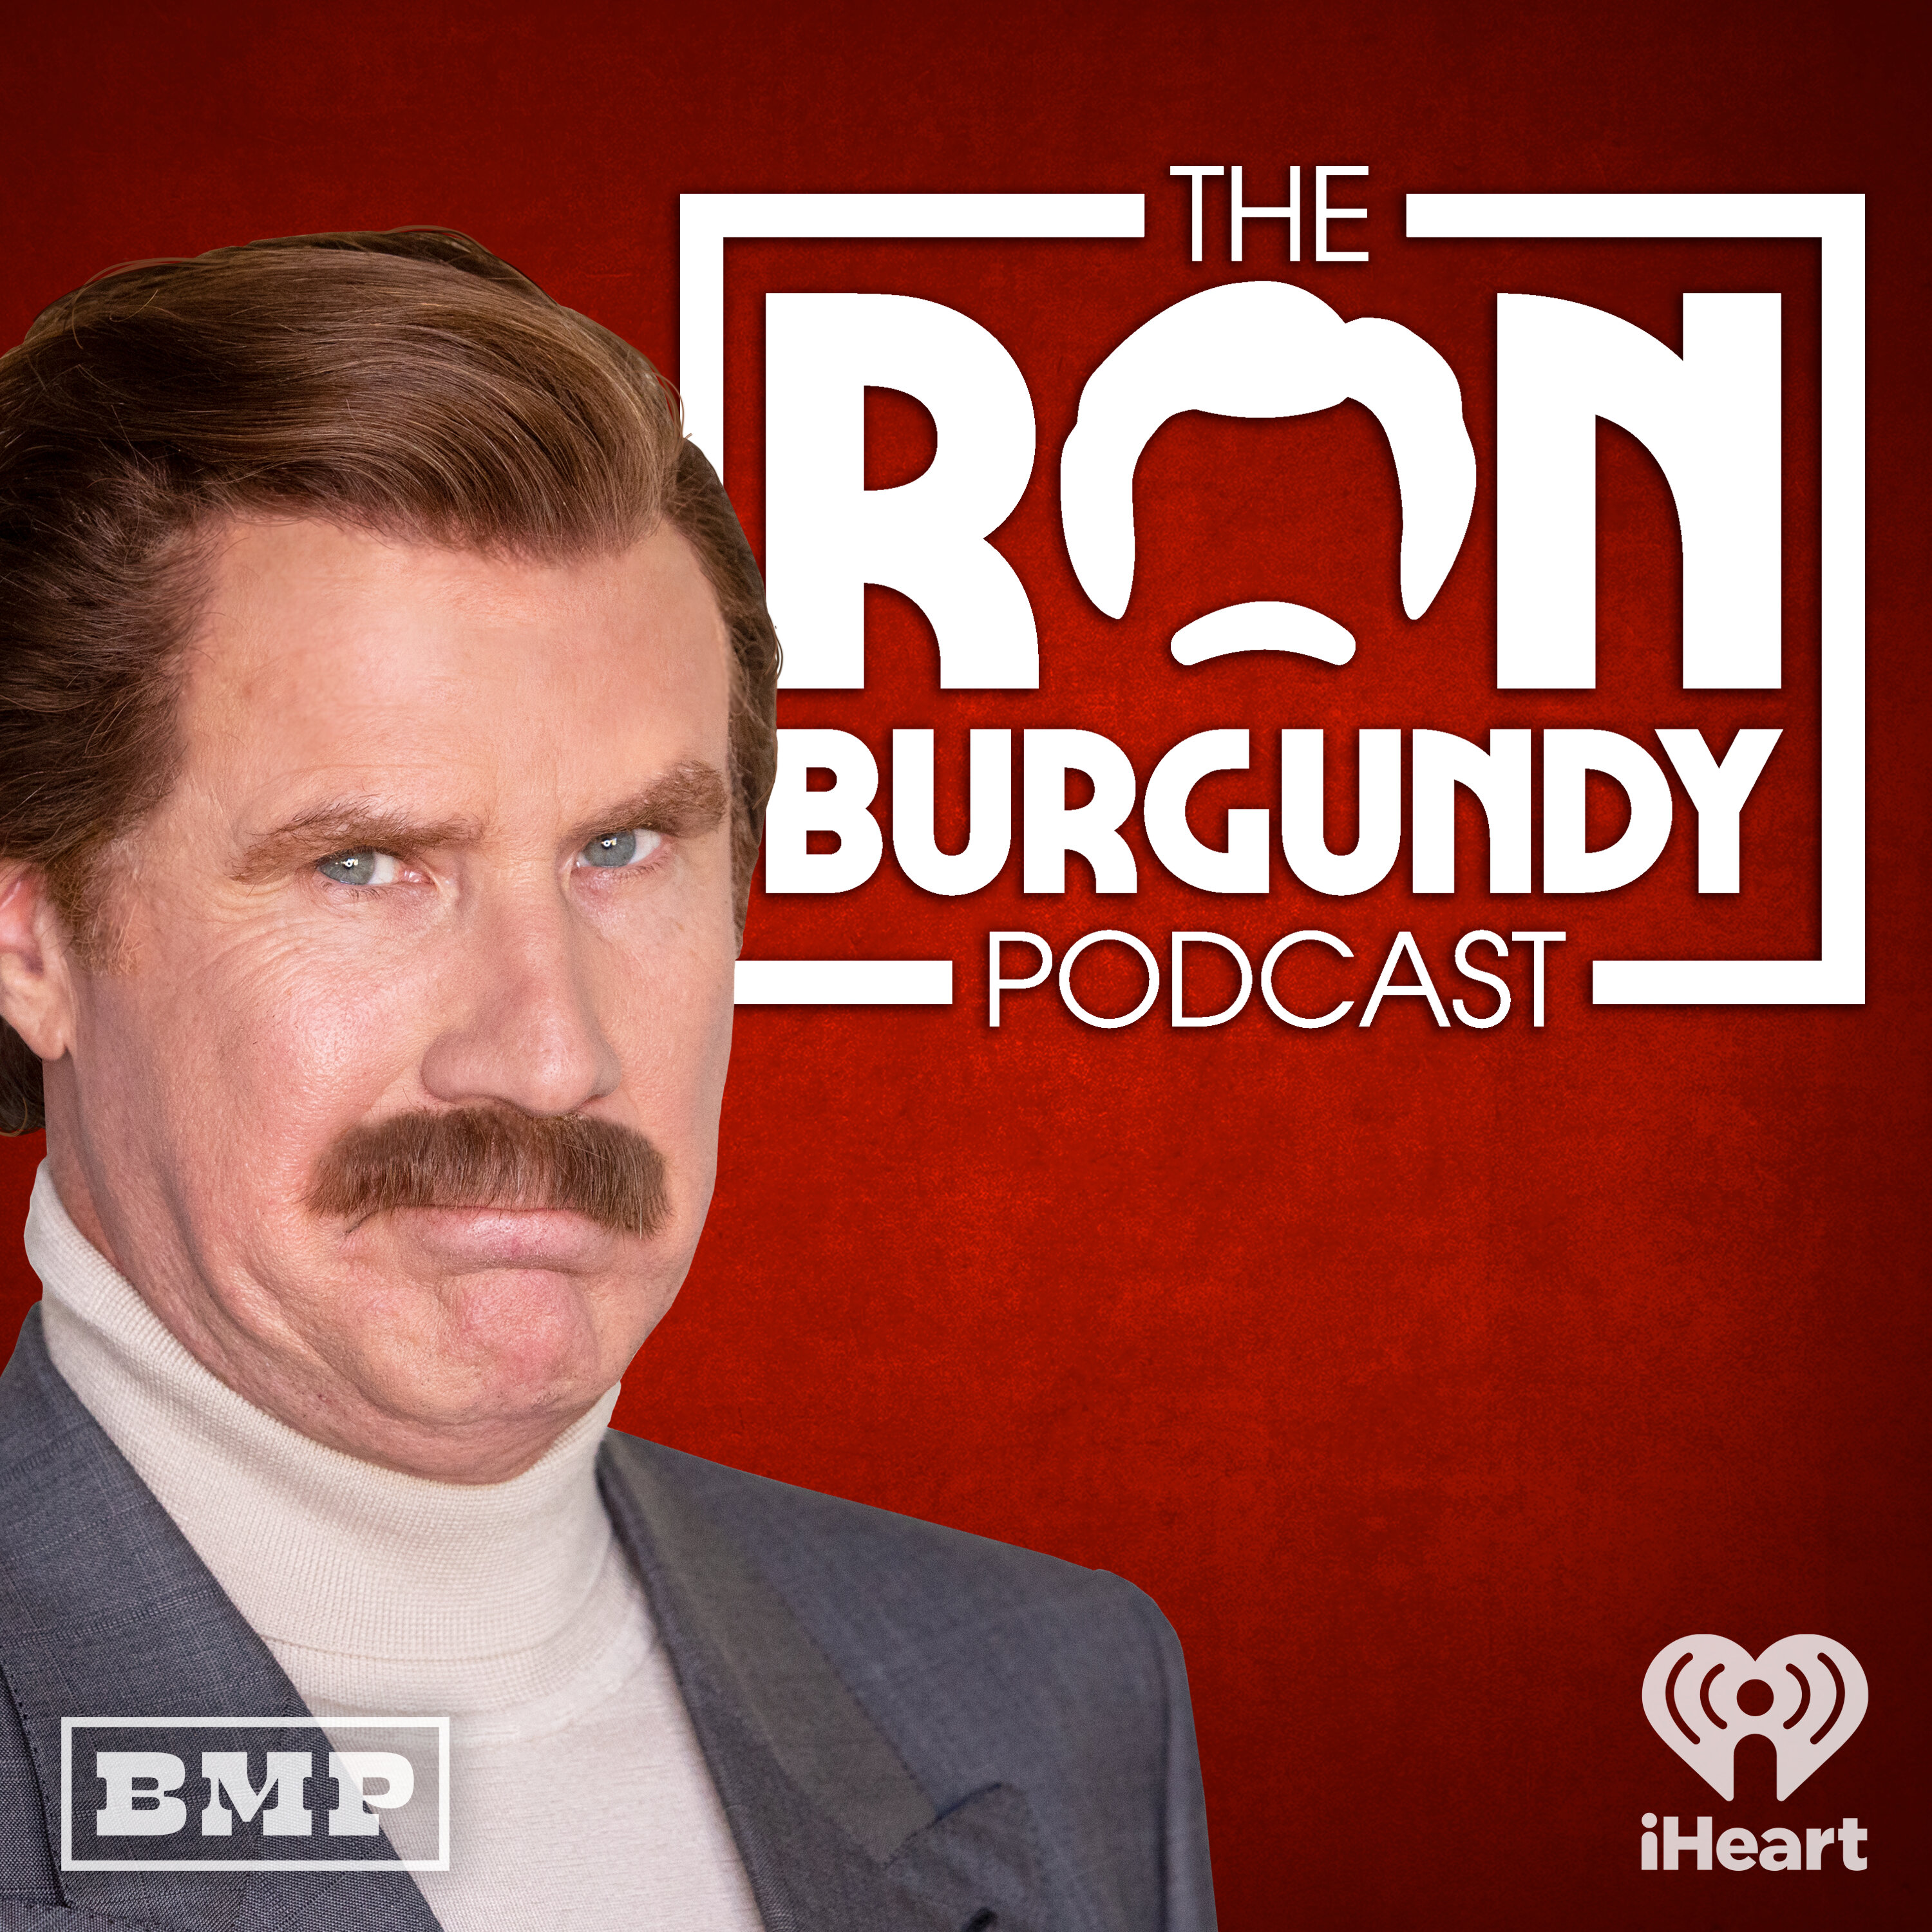 The Ron Burgundy Podcast podcast show image